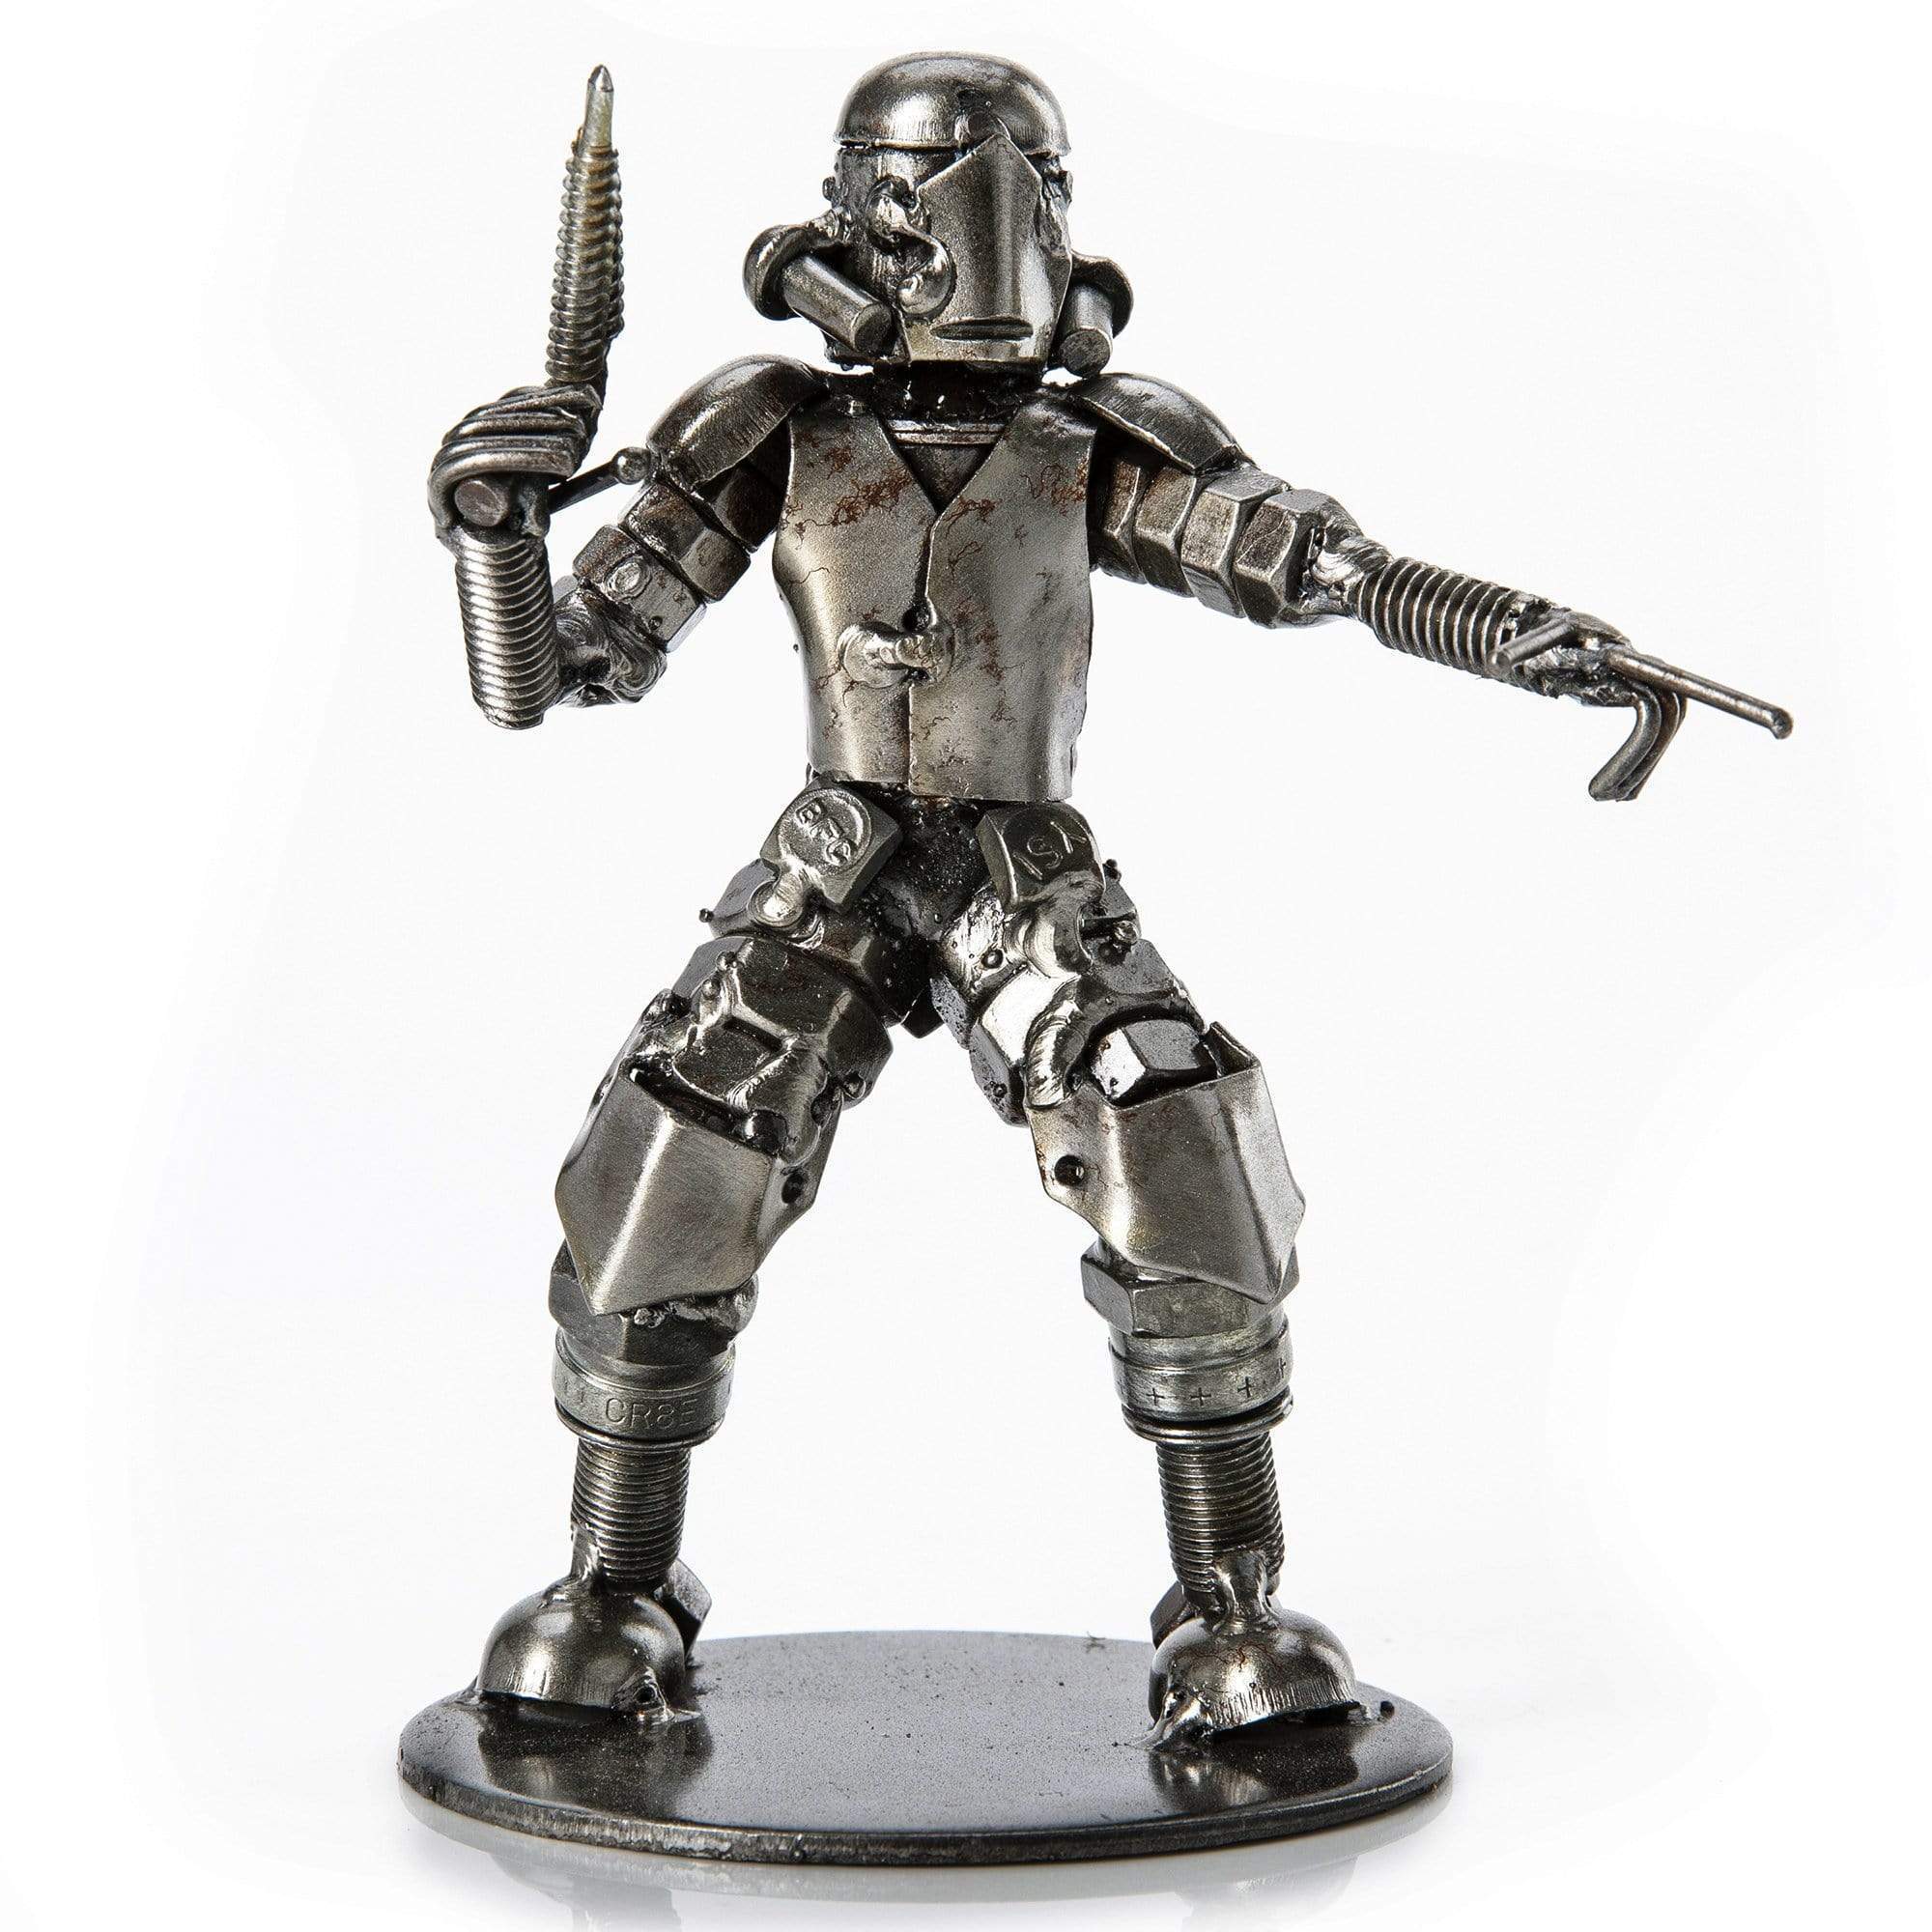 Kalifano Recycled Metal Art Storm Trooper Pointing Inspired Recycled Metal Sculpture RMS-250STP-N